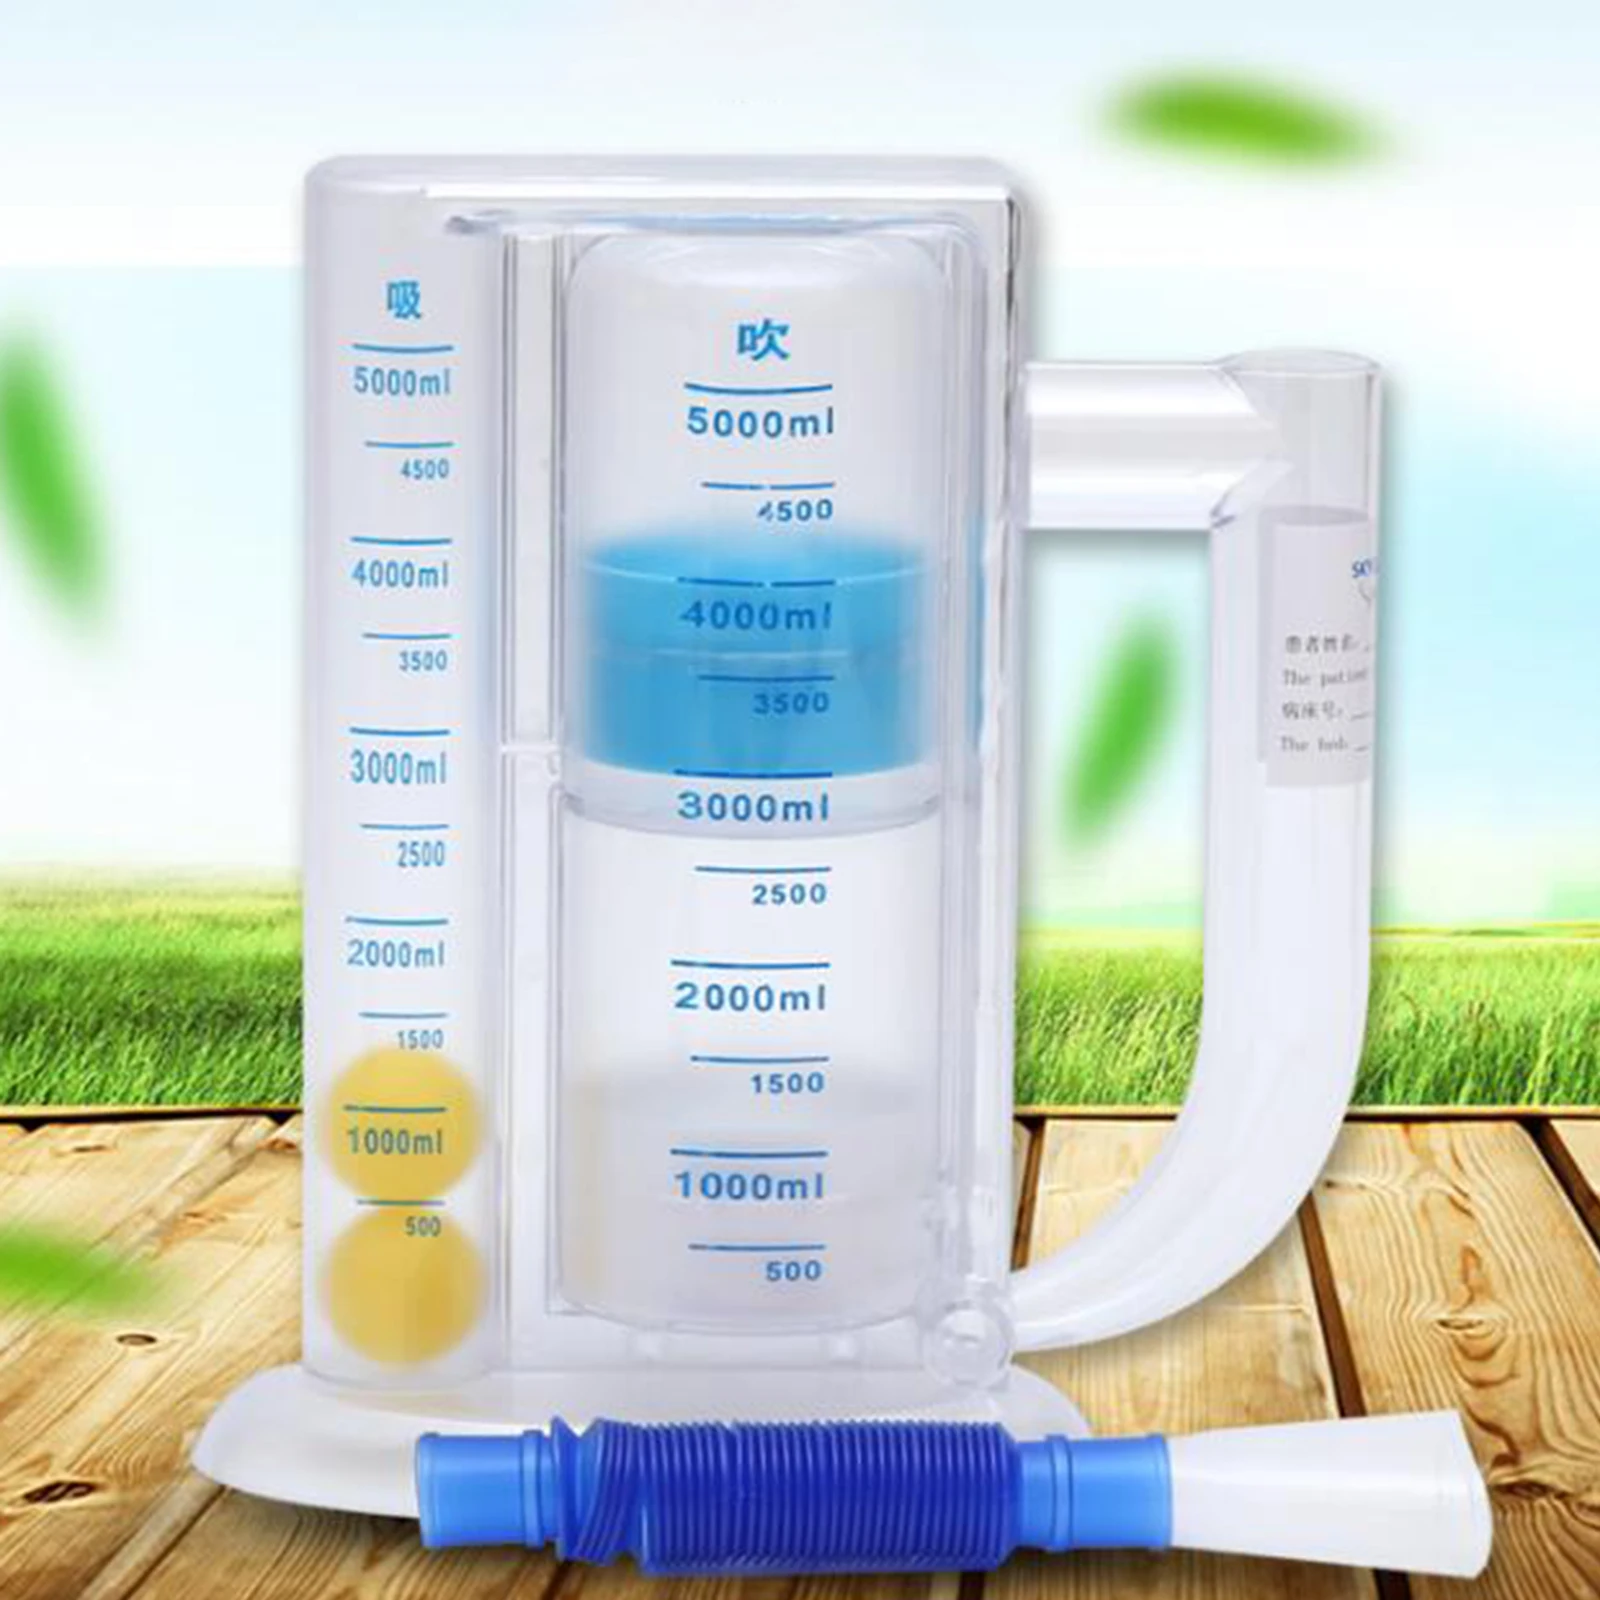 5000ml 3-Ball Lung Deep Breath Trainer Exerciser Incentive Spirometer, helps fight stress and anxiety